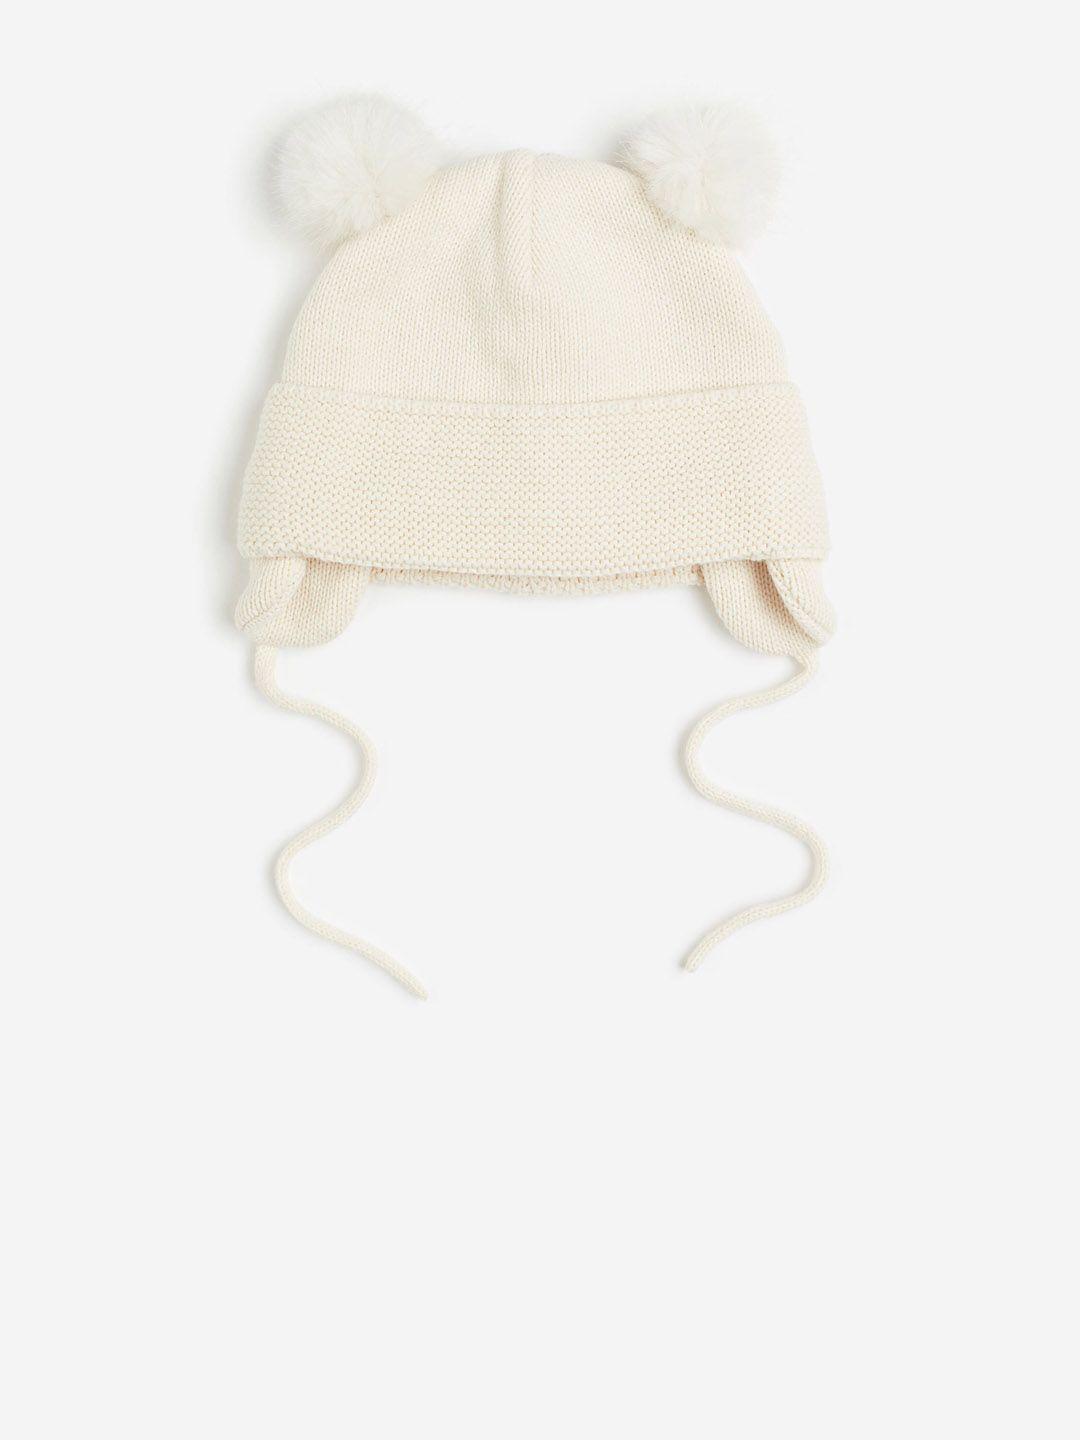 H&M Boys Fleeced-Lined Beanie with earflaps